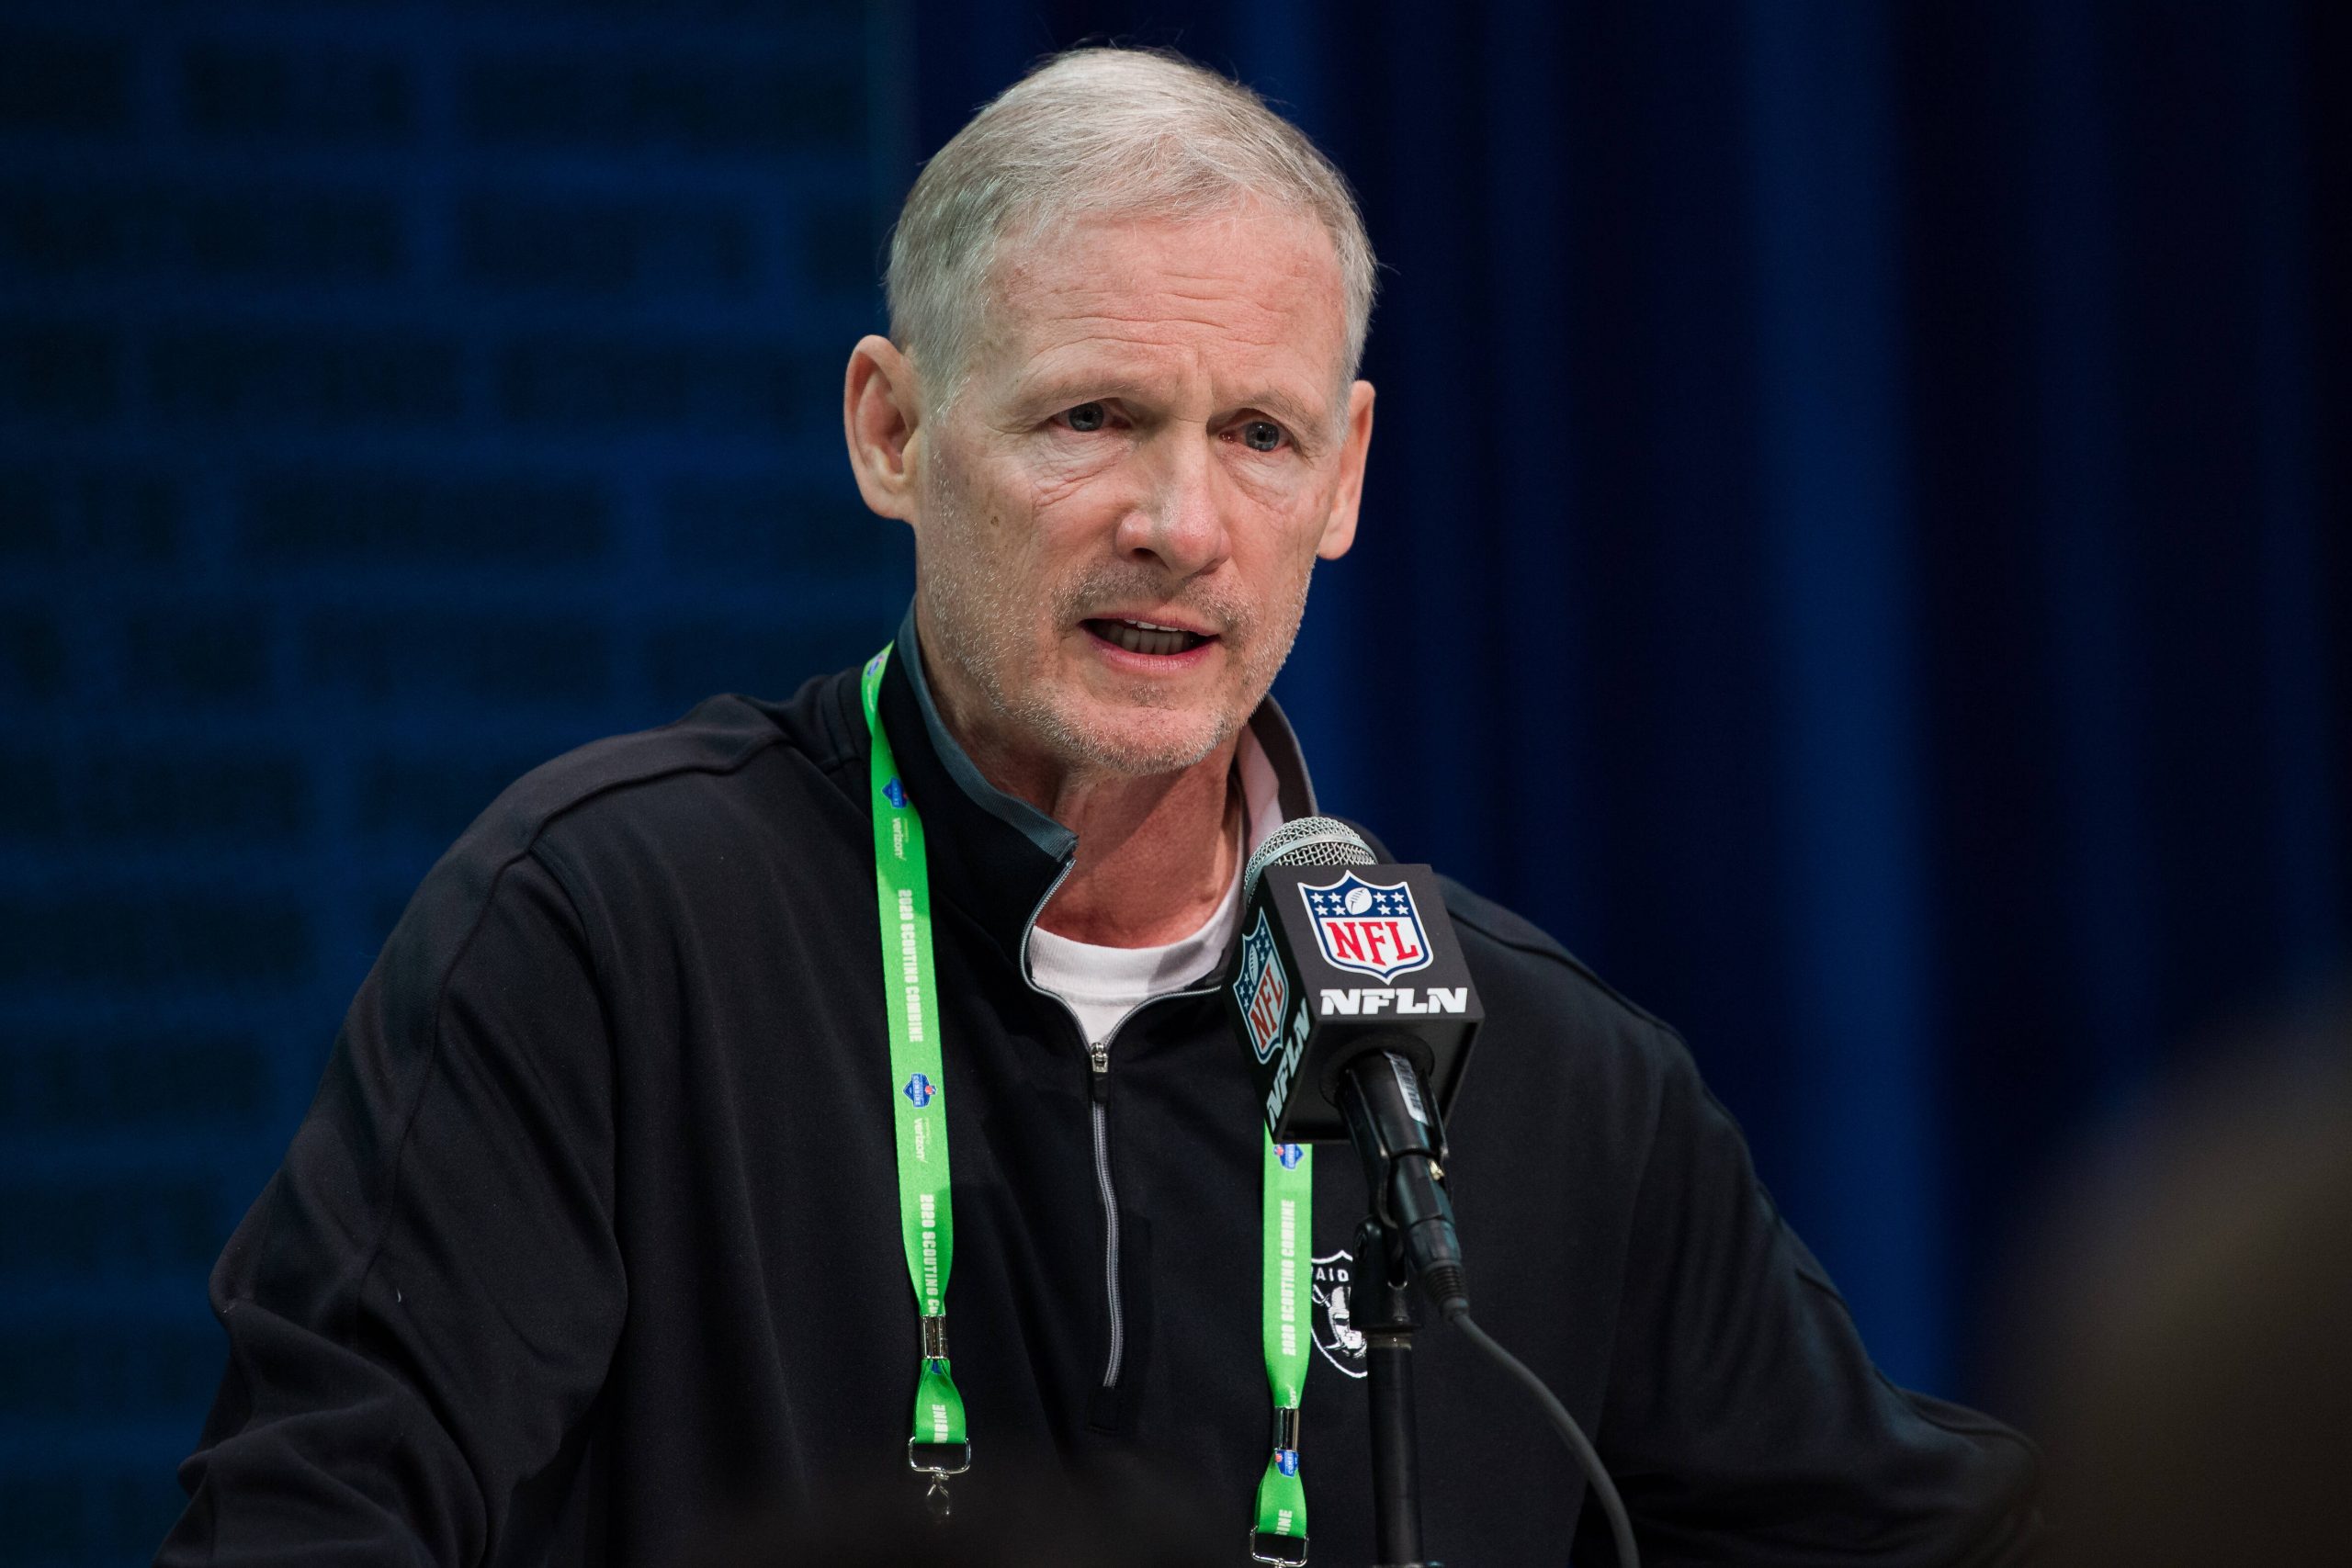 INDIANAPOLIS, IN - FEBRUARY 25: Oakland Raiders general manager Mike Mayock answers questions from the media during the